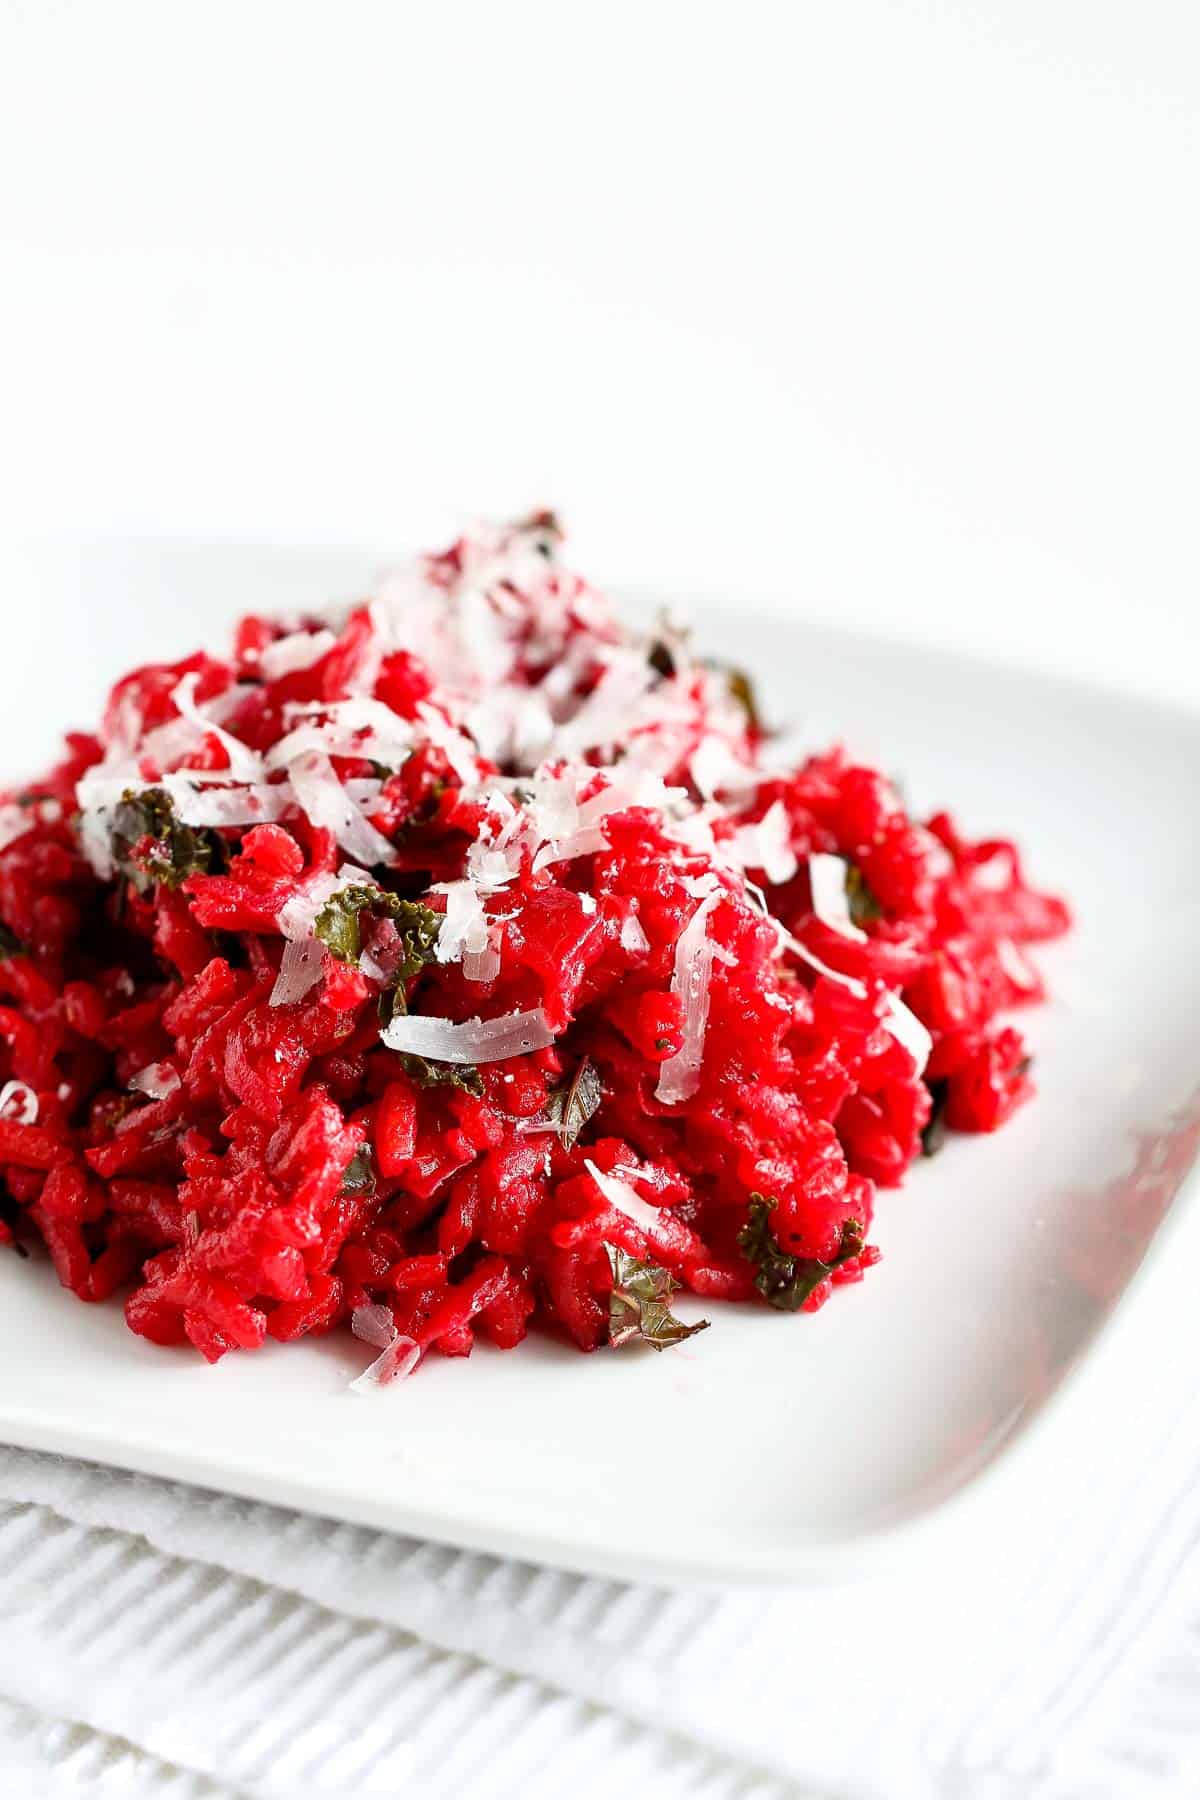 Beet risotto with kale on a white plate.